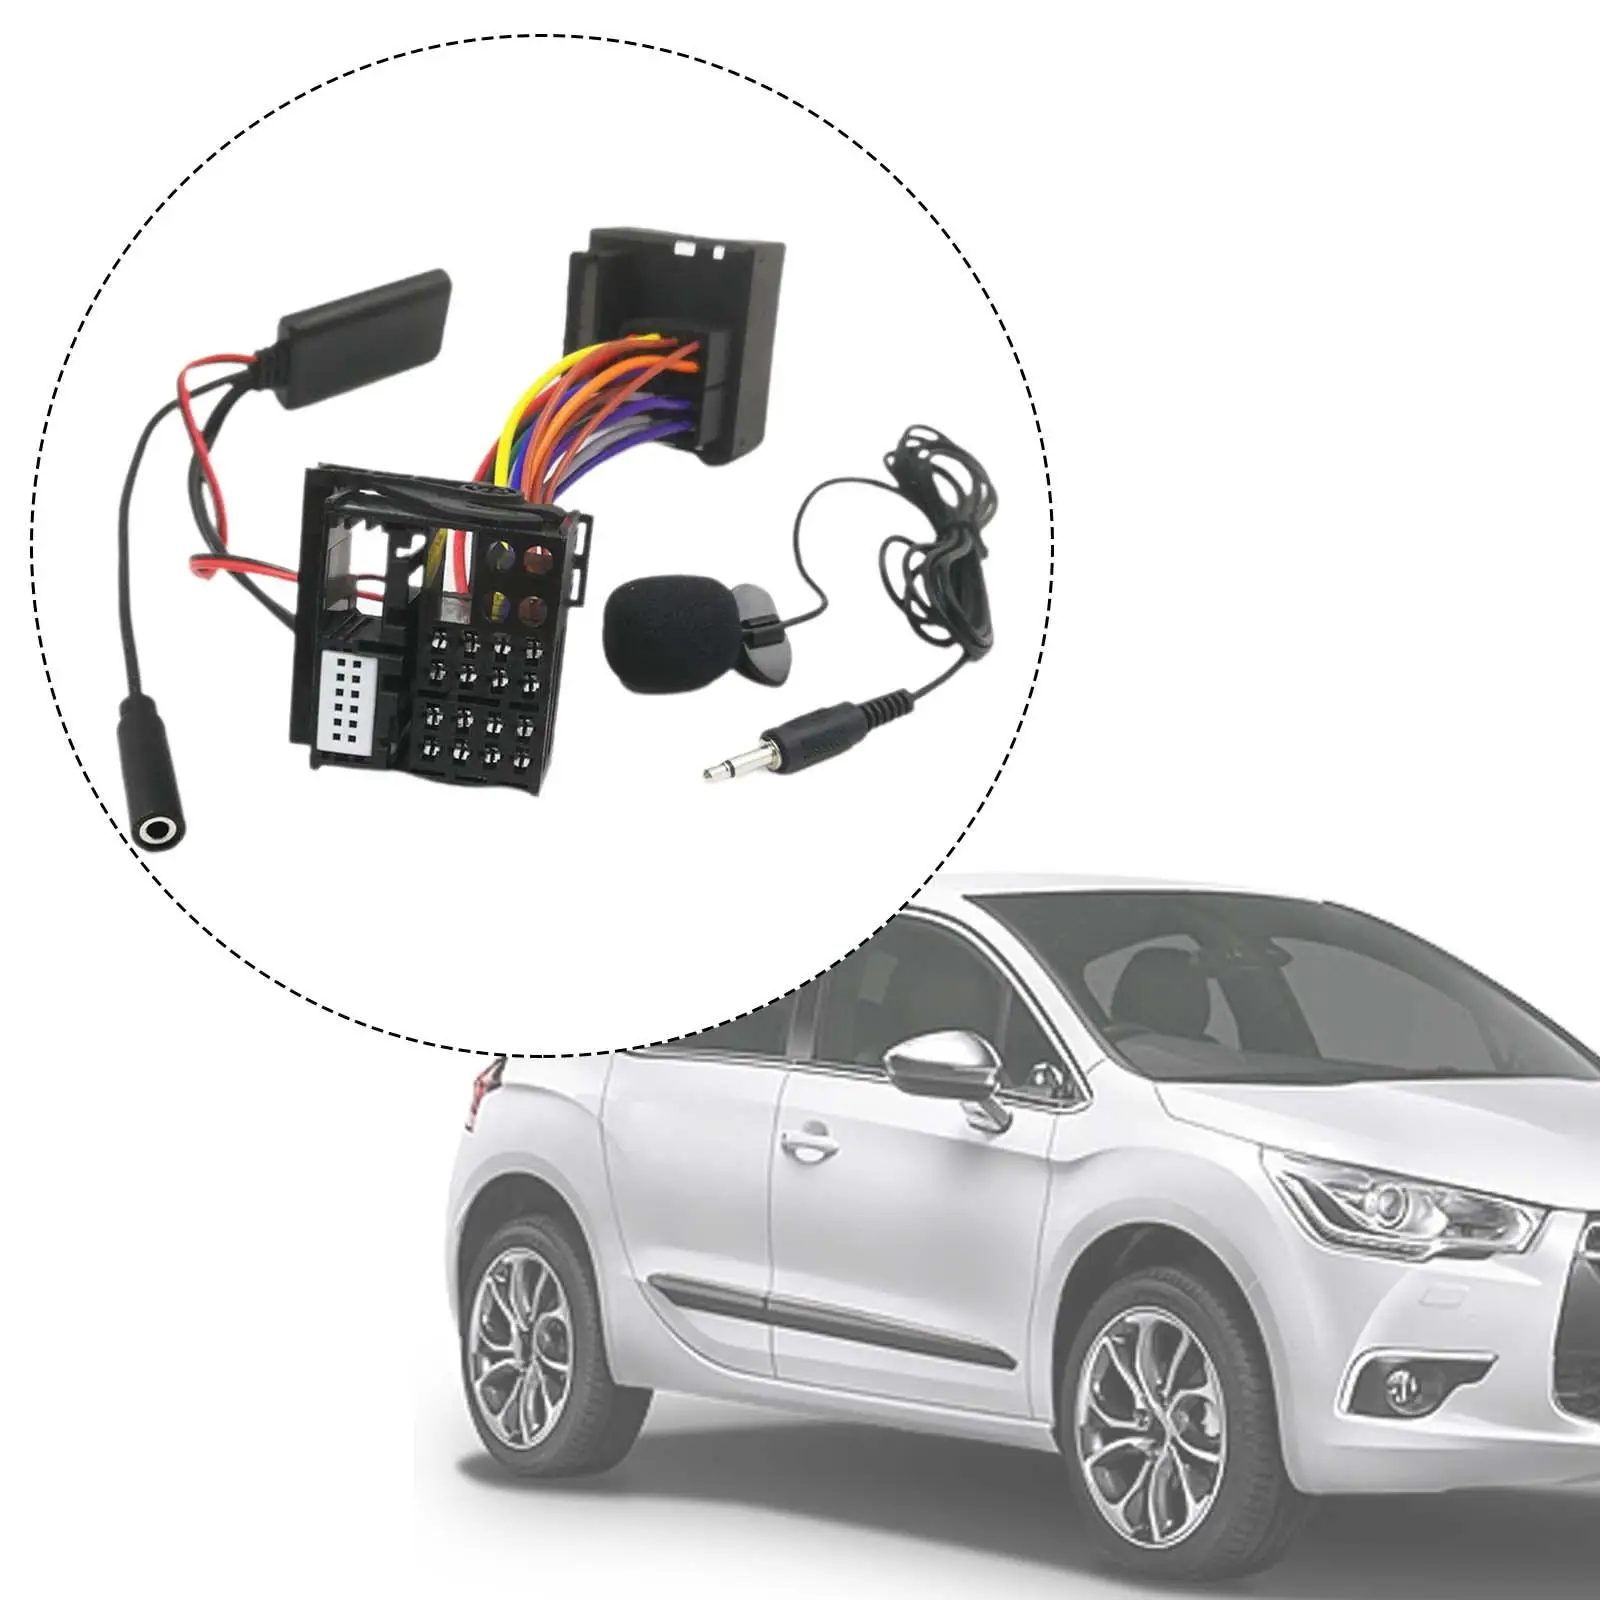 Bluetooth 5.0 Module Receiver Adapter High Performance with Mic Audio Adapter for Peugeot 207 307 307SW 407 308